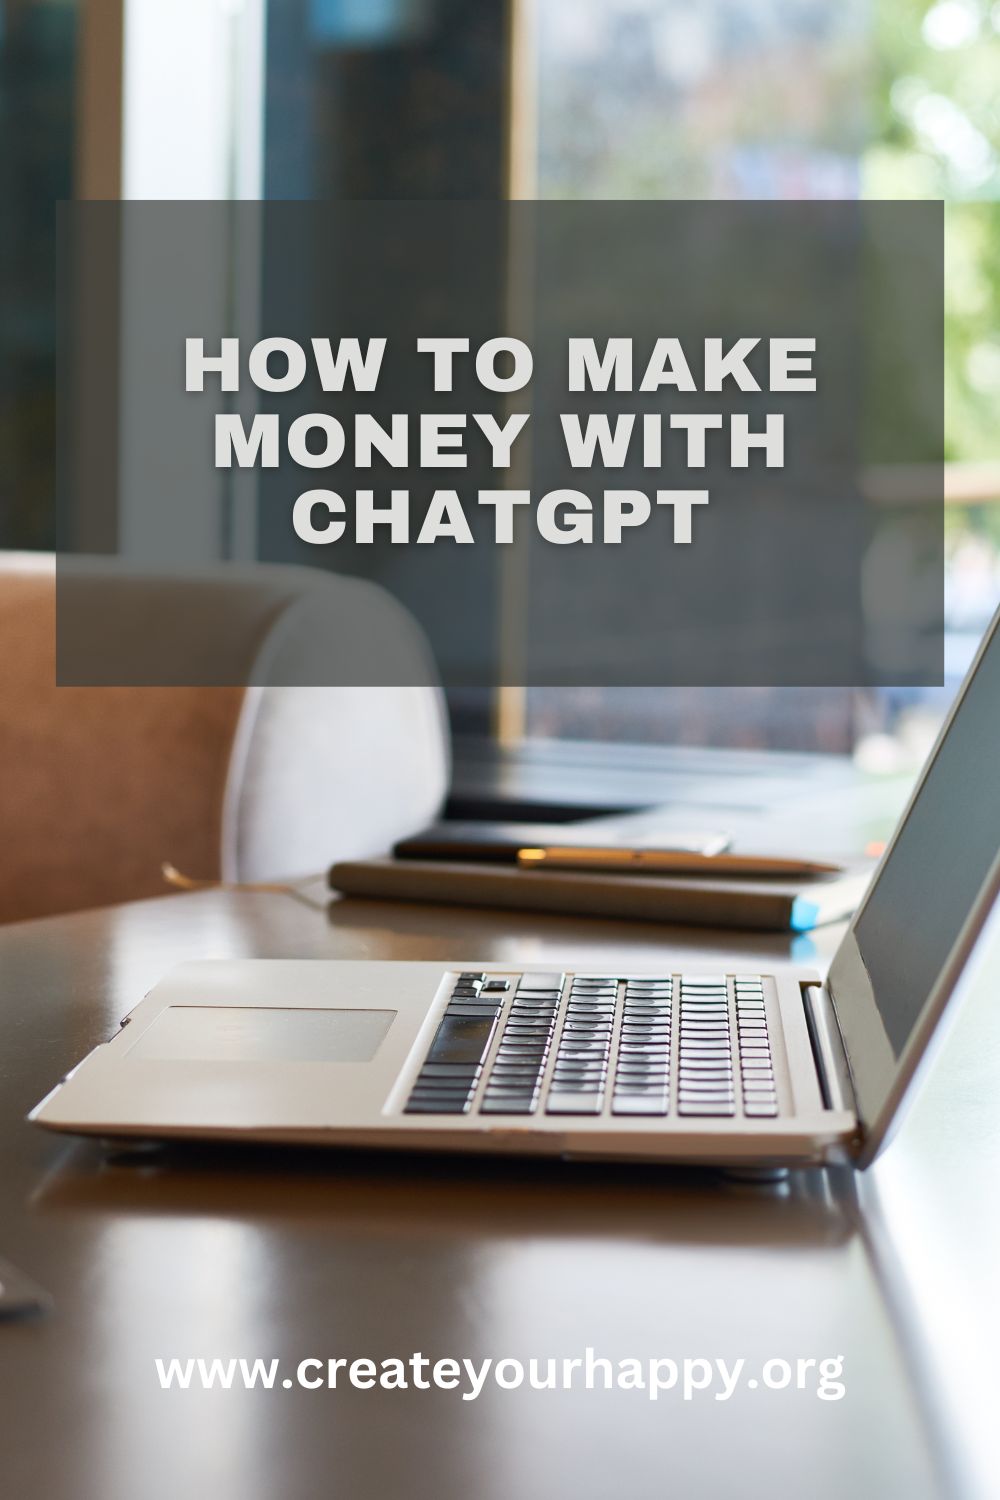 How to Make Money With ChatGPT